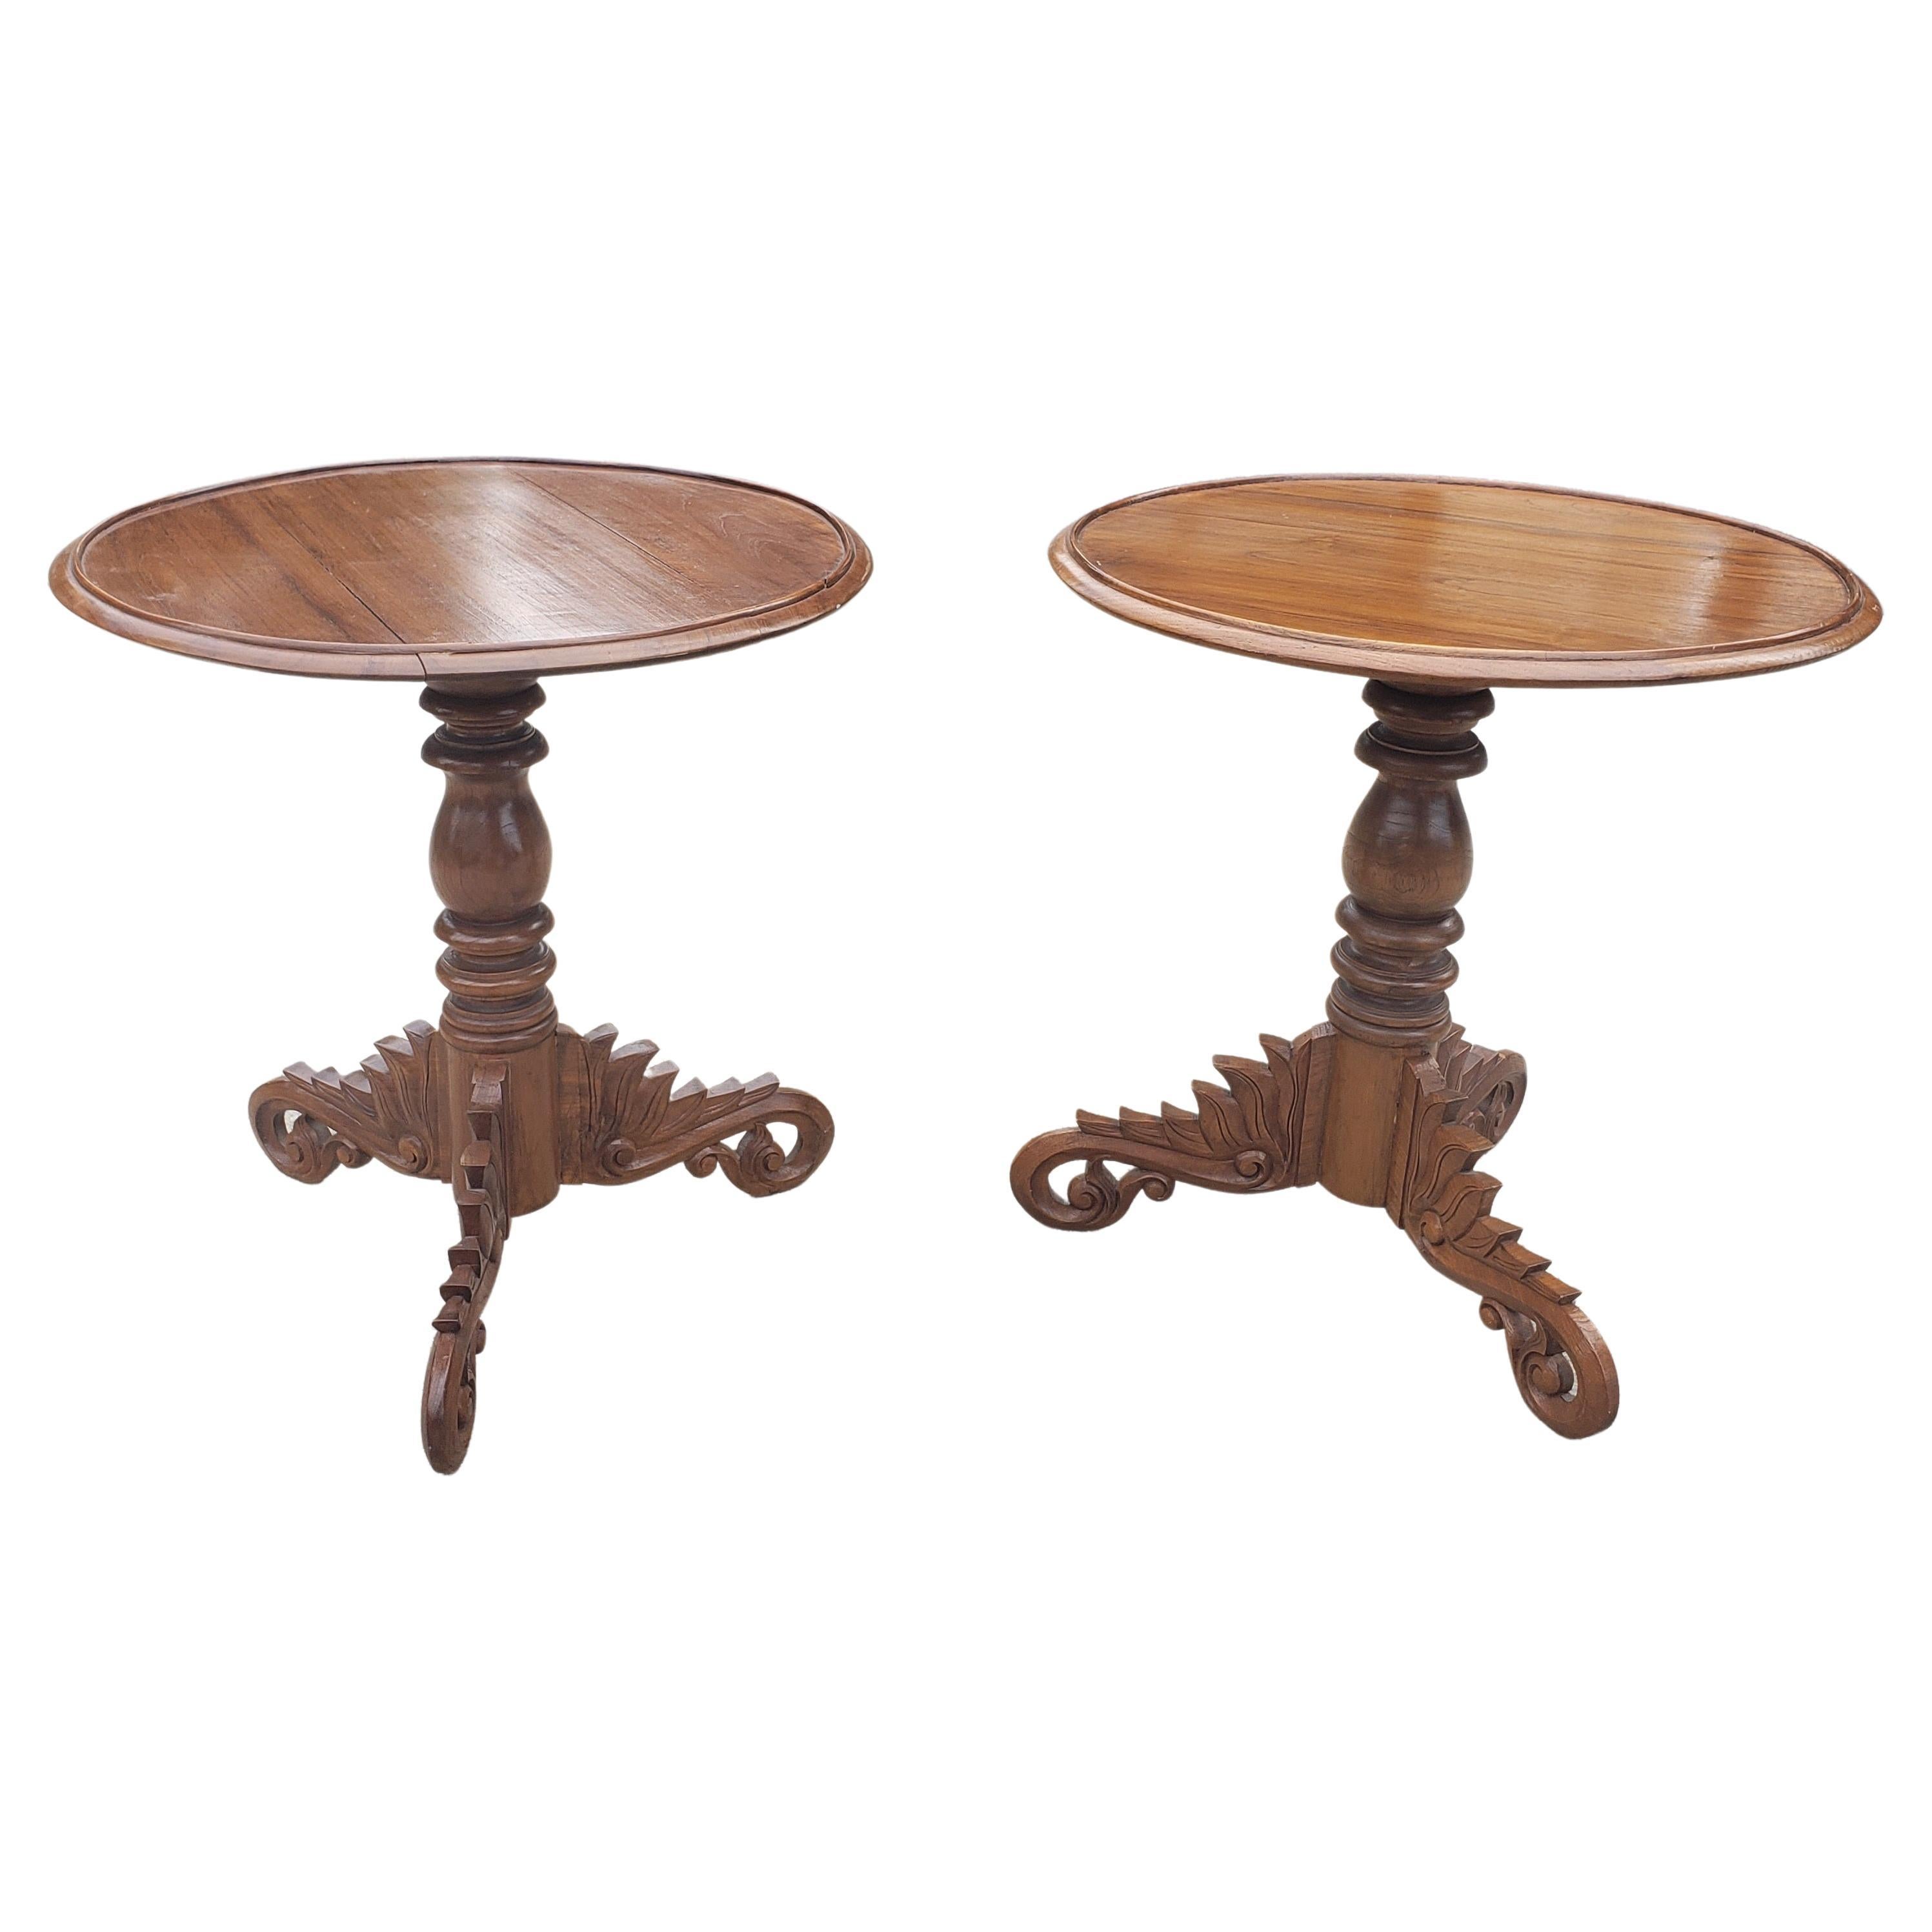 Vintage Pedestal Mahogany Tripod Gator Tail Feet Side Tables, a Pair For Sale